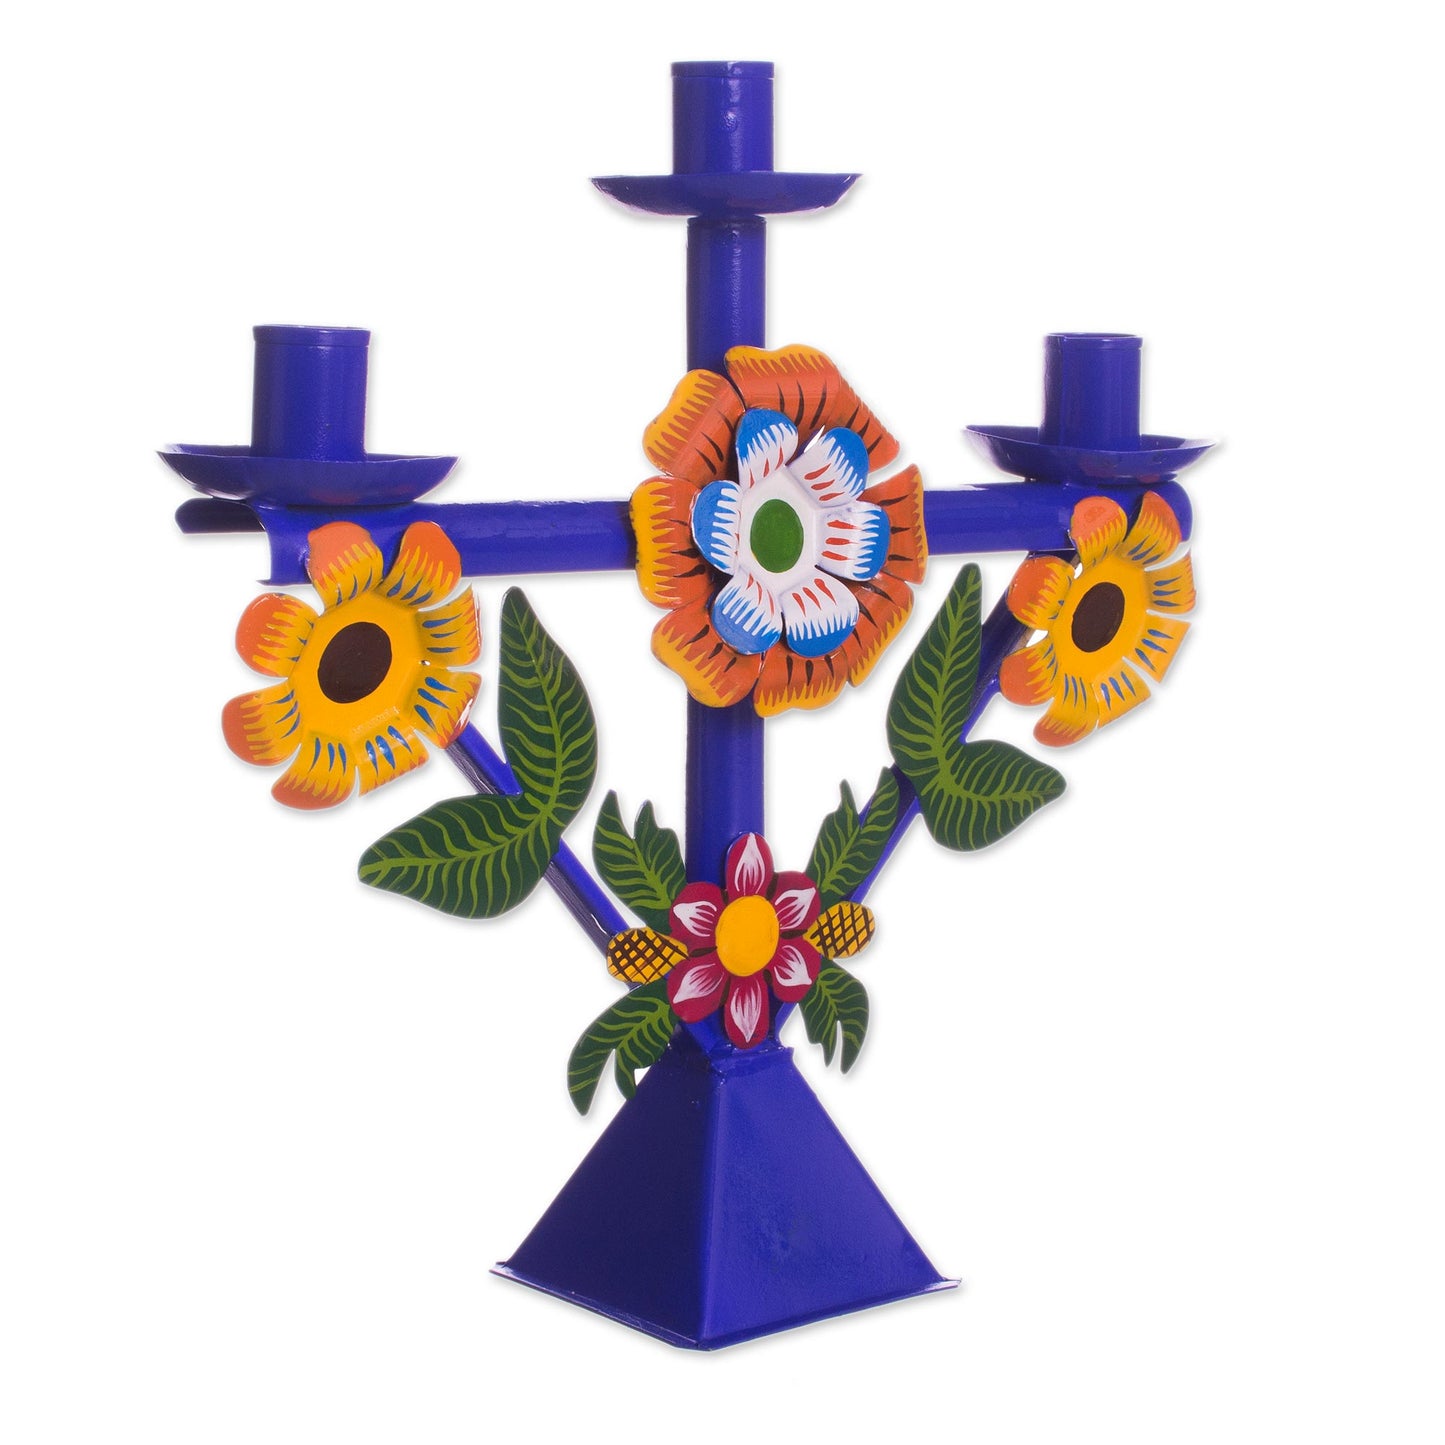 Margarita Temple in Blue Floral Recycled Metal Candelabra in Blue from Peru